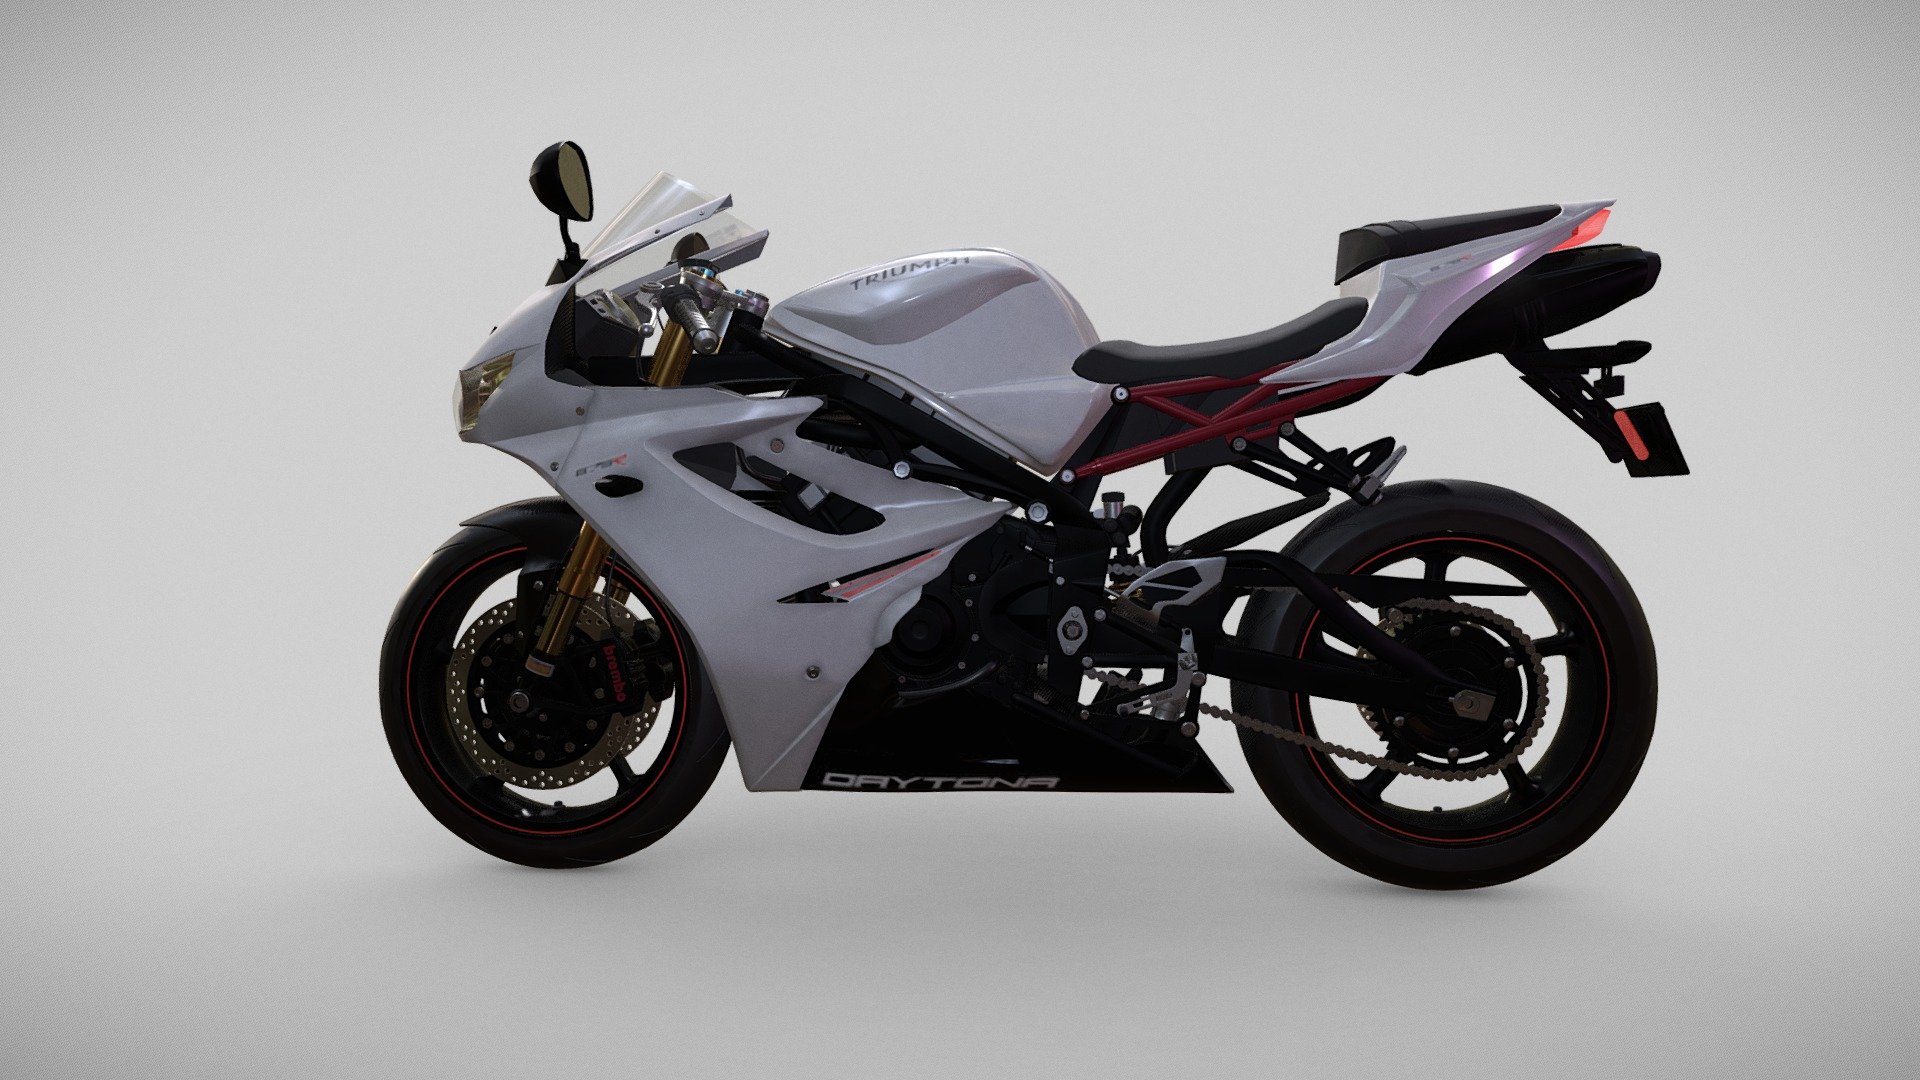 Triumph Daytona 675 
made by images from the internet not 100% copy

The attached archive Contains Maya 2018 scene file. FBX file. Textures (logos etc) Standart shaders. Model separated for rigging 3d model